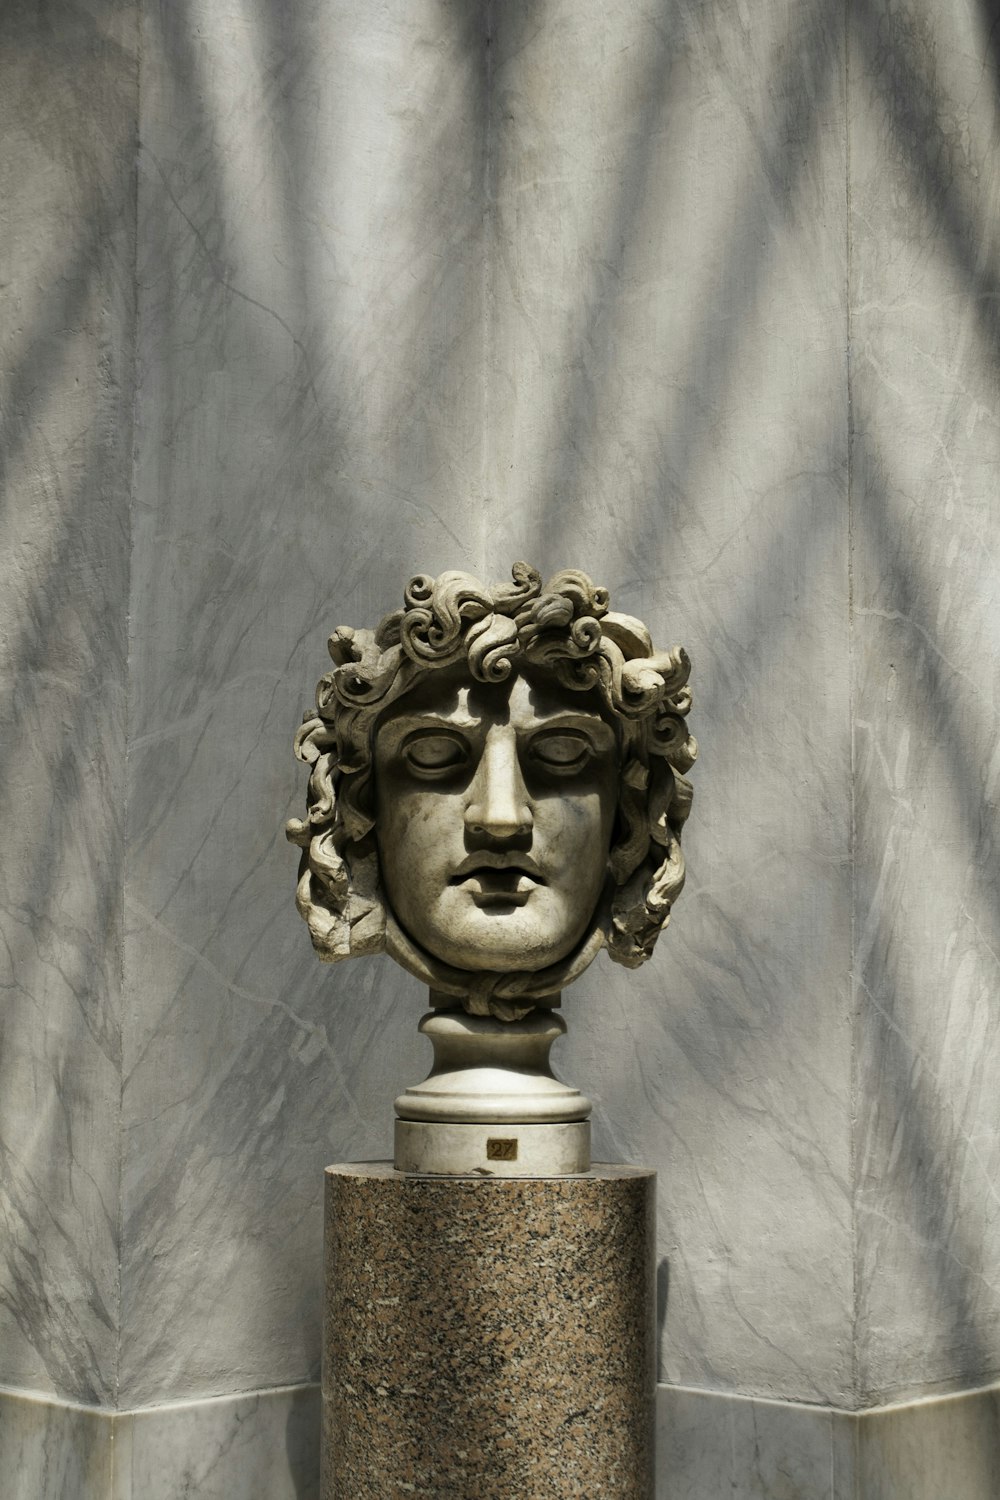 a statue of a woman's head on a pedestal